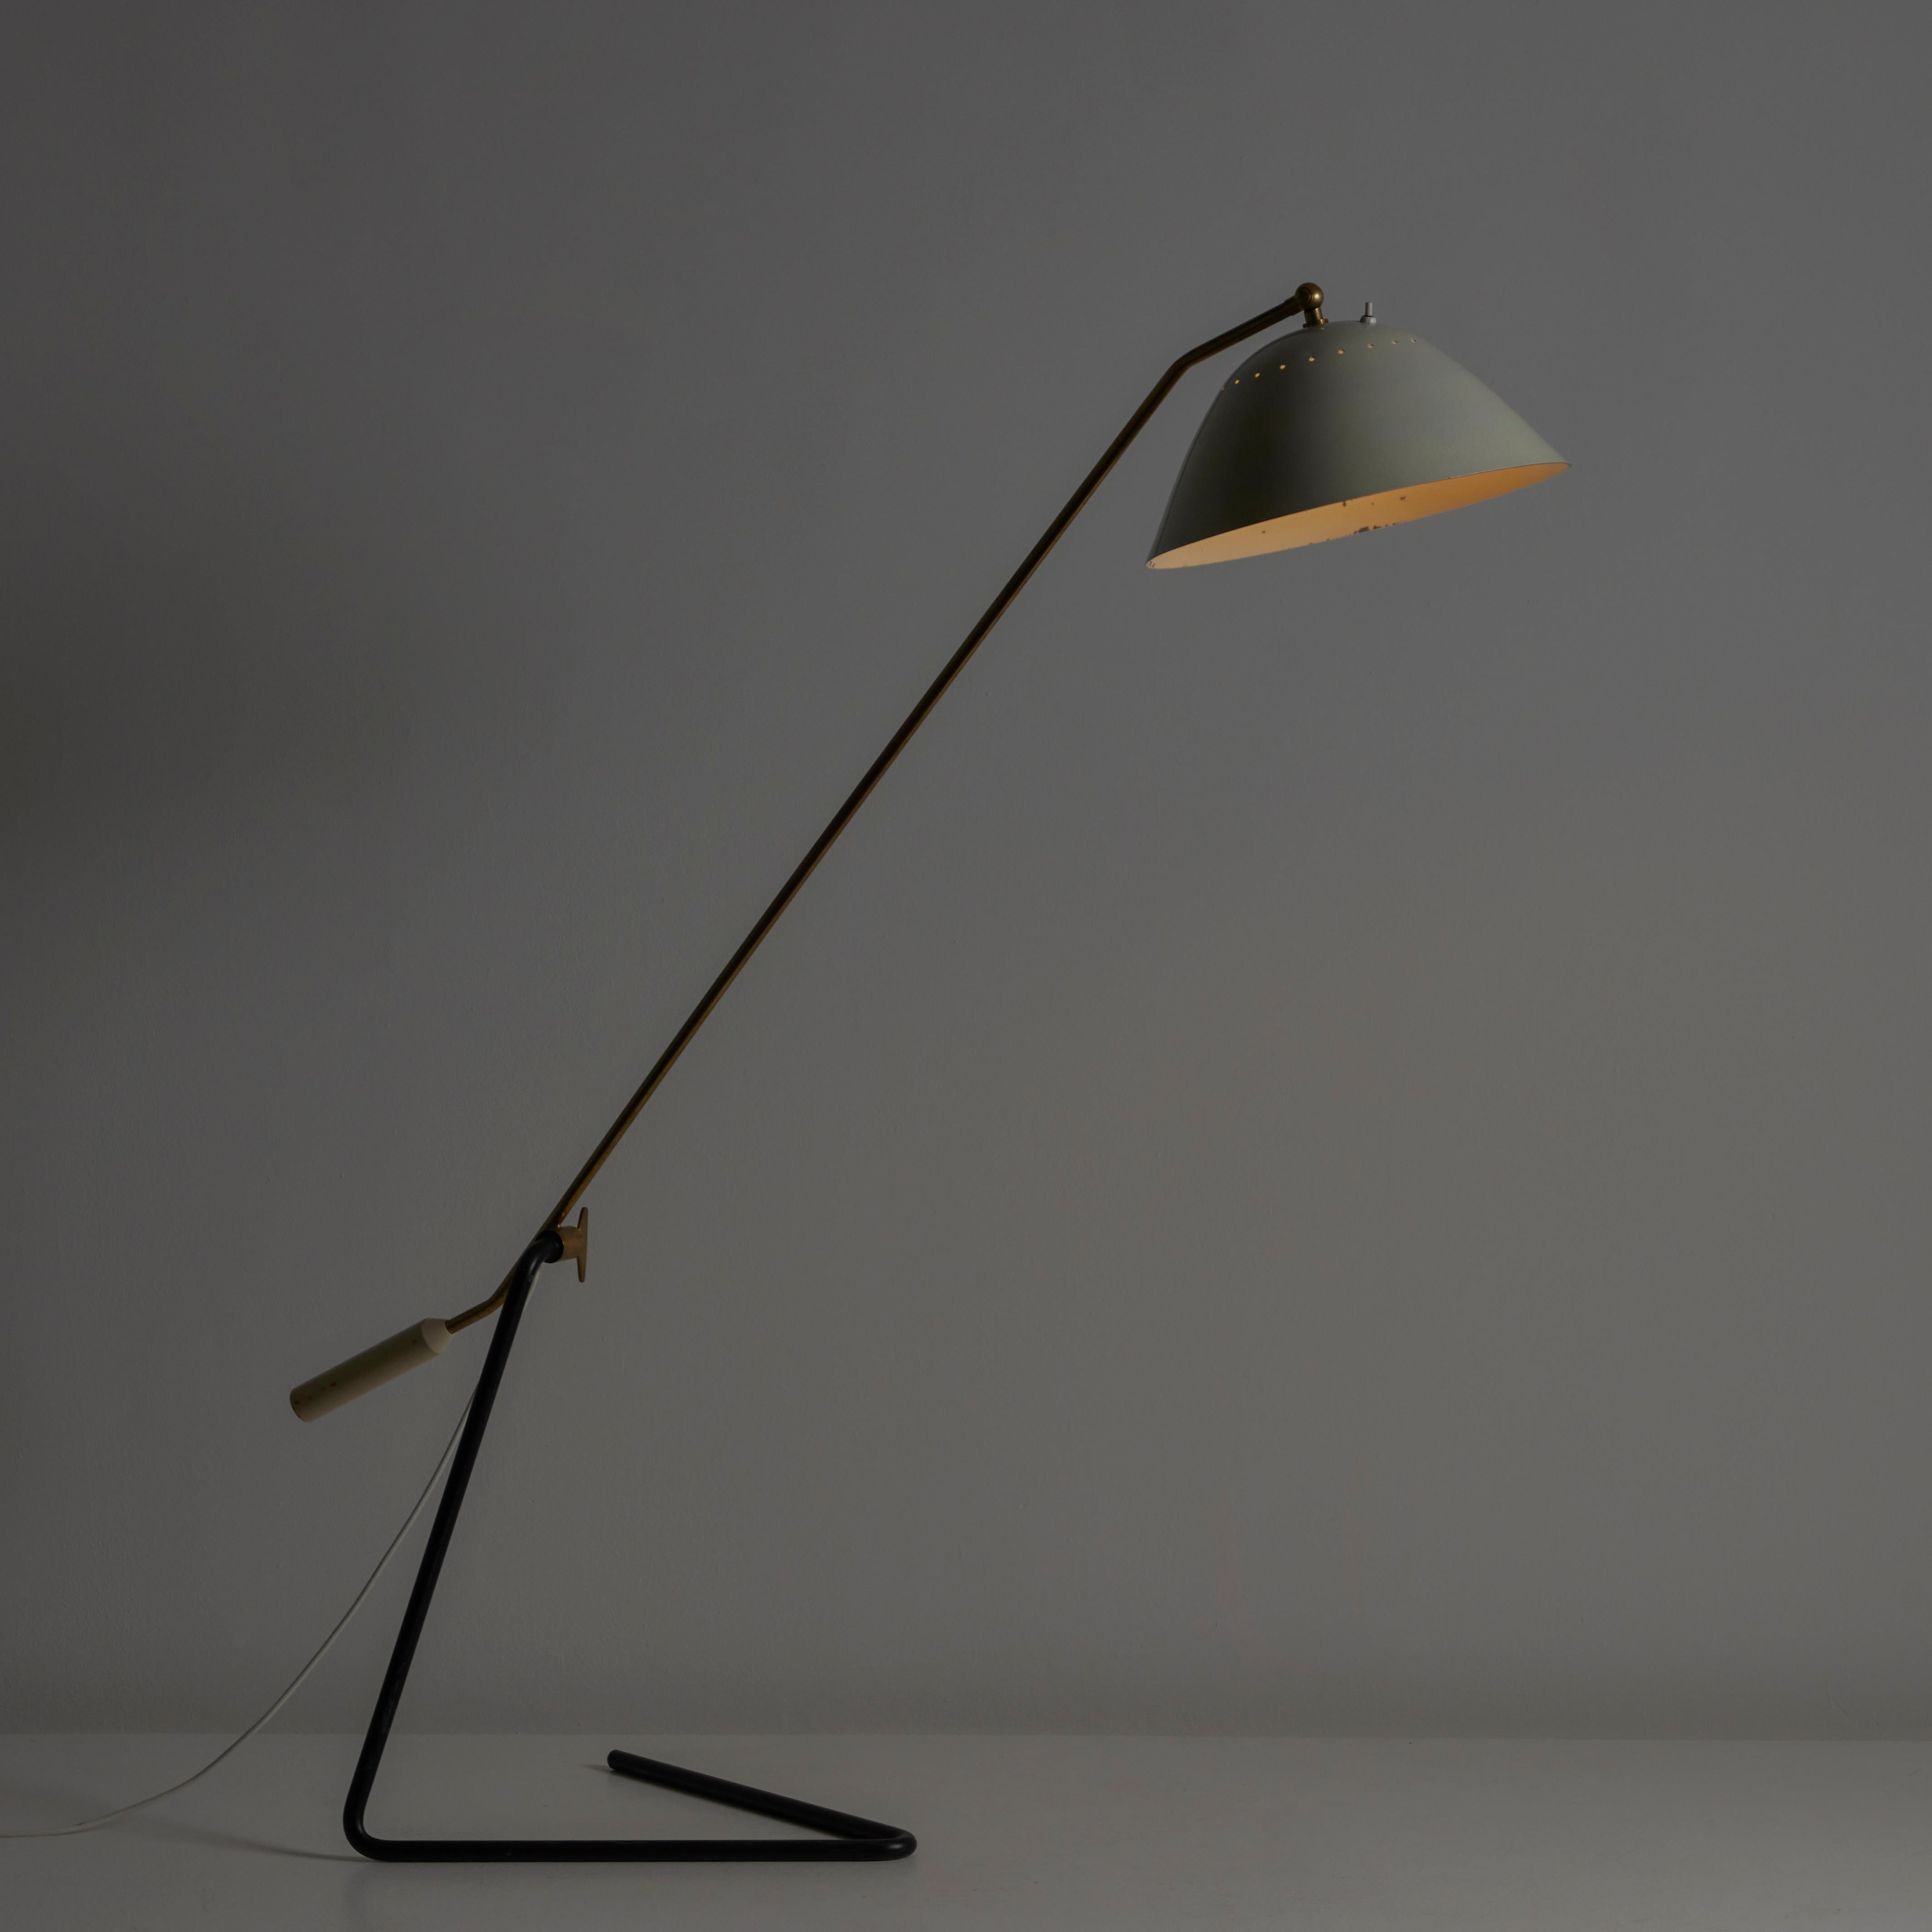 Floor Lamp by Stilnovo. Designed and manufactured in Italy, circa the 1960s. Adjustable cantilever floor lamp, with sectioned enamel finish, as well as a patinated polished brass stem. The shade features subtle perforation at the top to offer